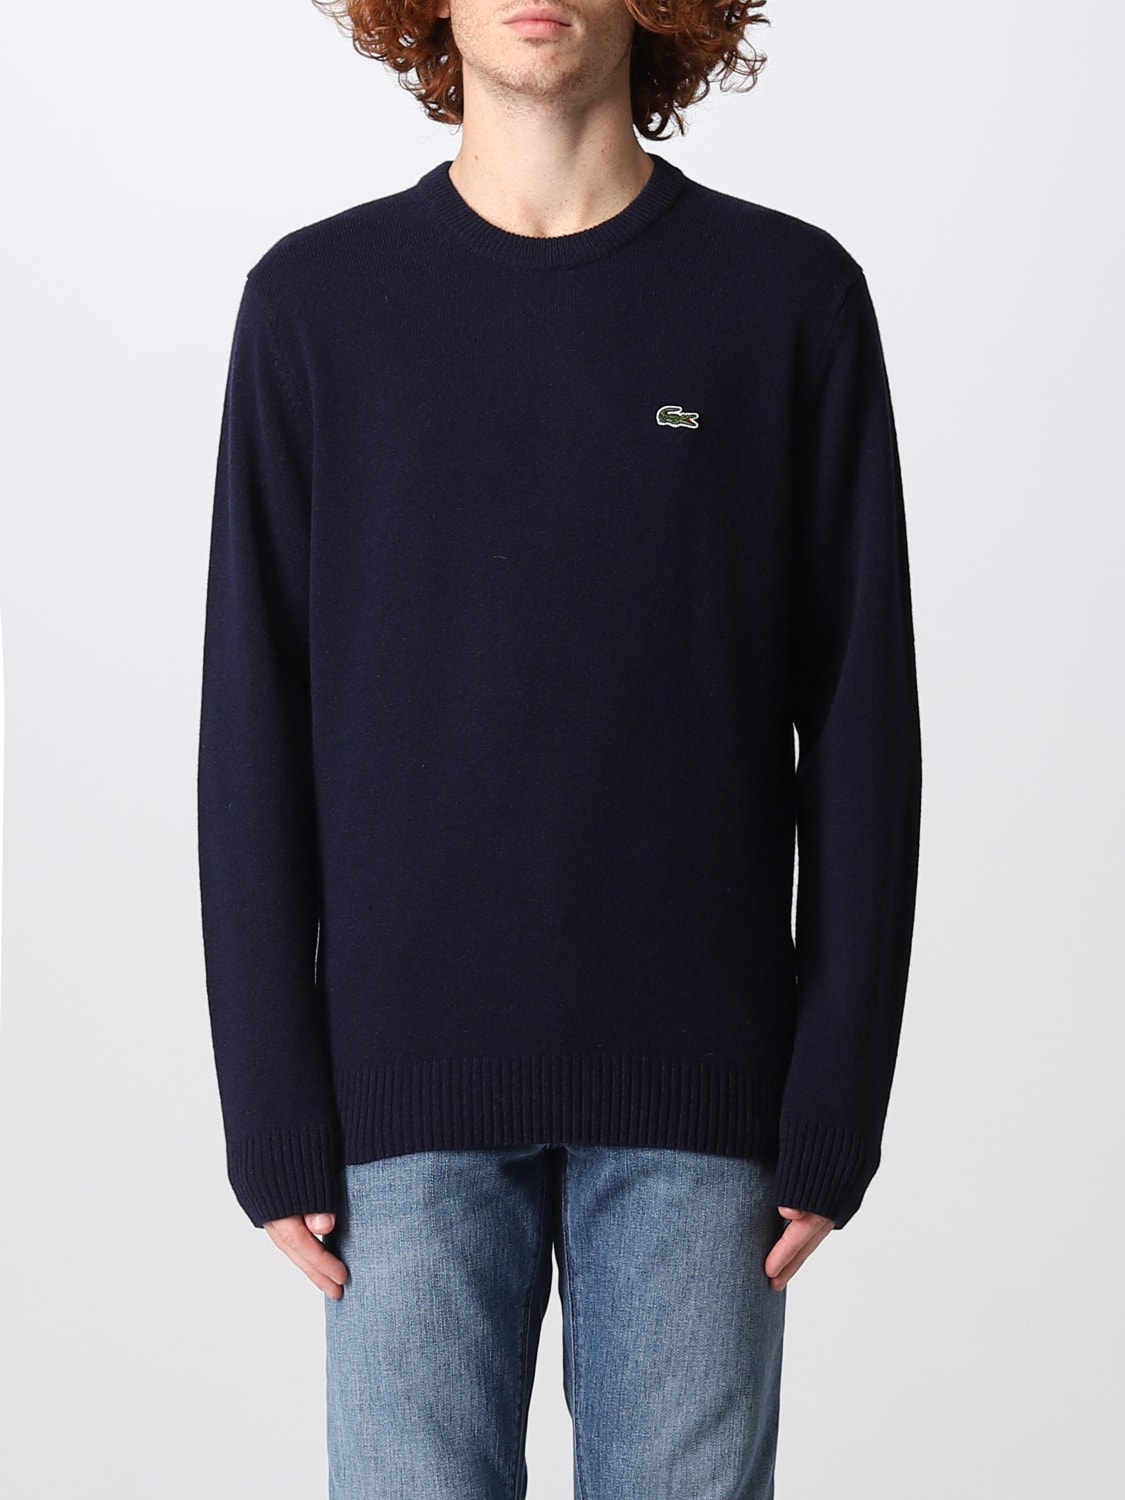 panorama sentar periodista Lacoste Outlet: sweater for man - Navy | Lacoste sweater AH1988 online on  GIGLIO.COM